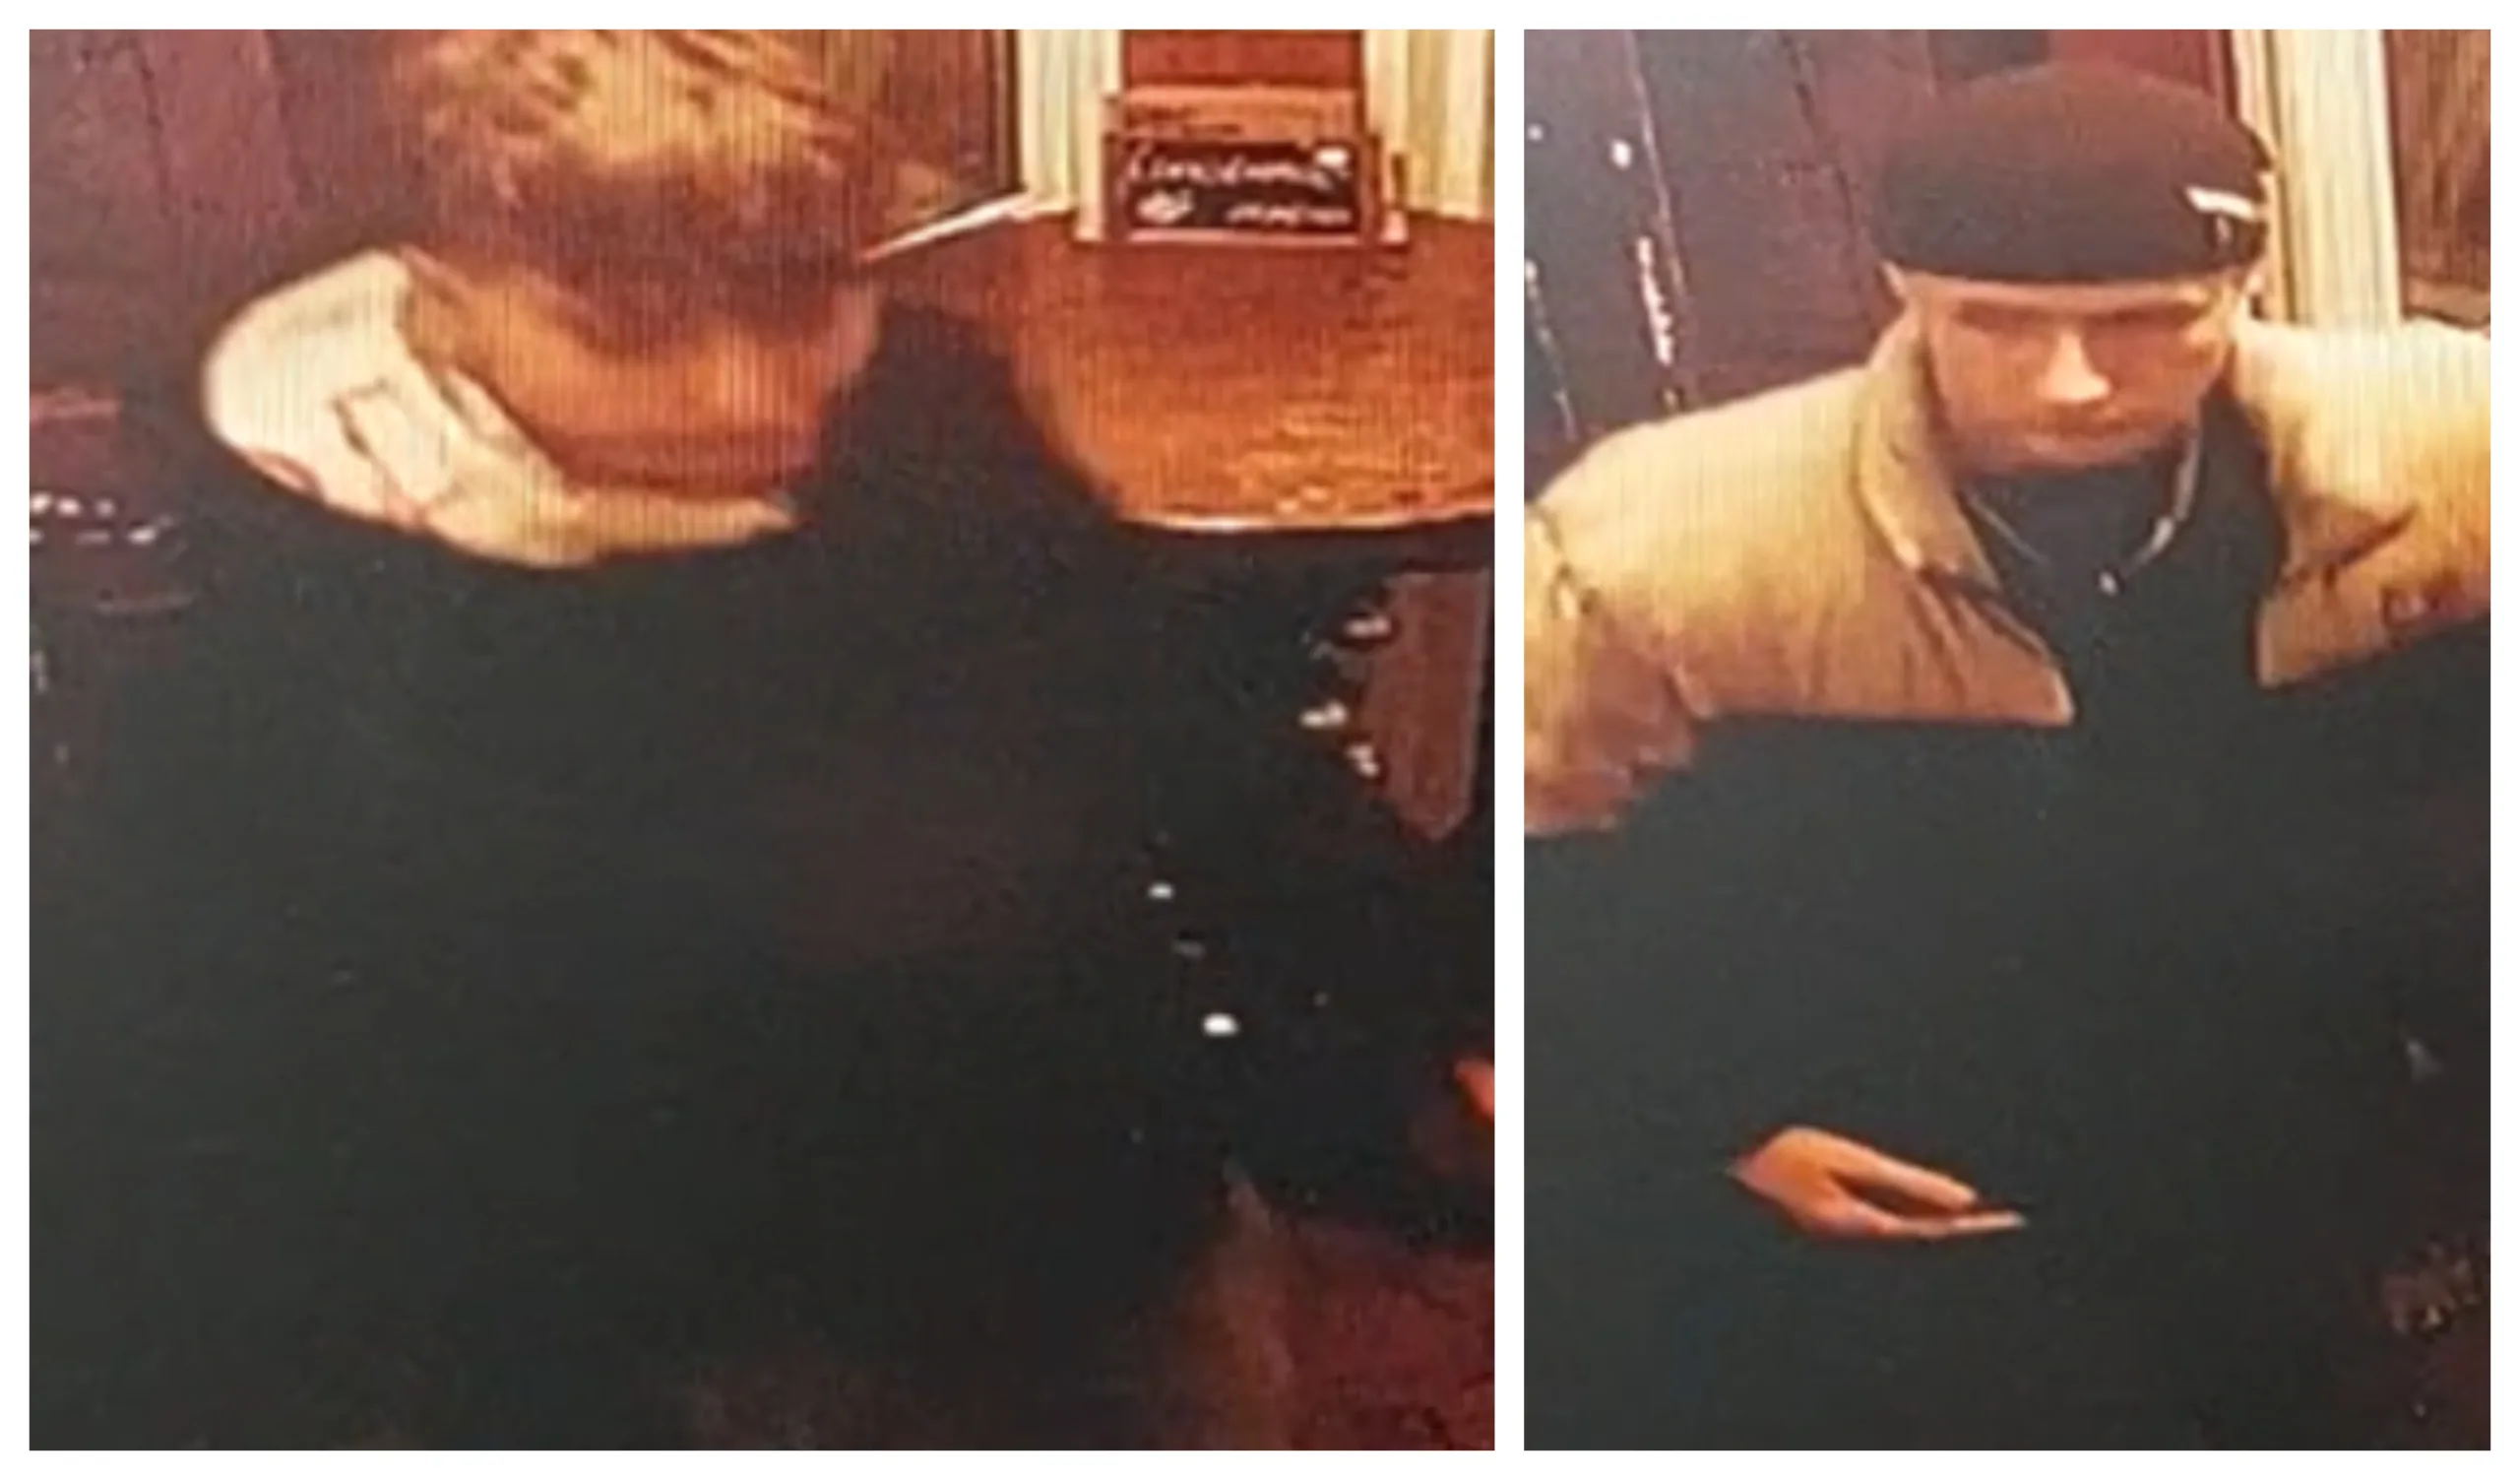 Police have released CCTV images of two men they would like to speak to in connection with a burglary in Peterborough.